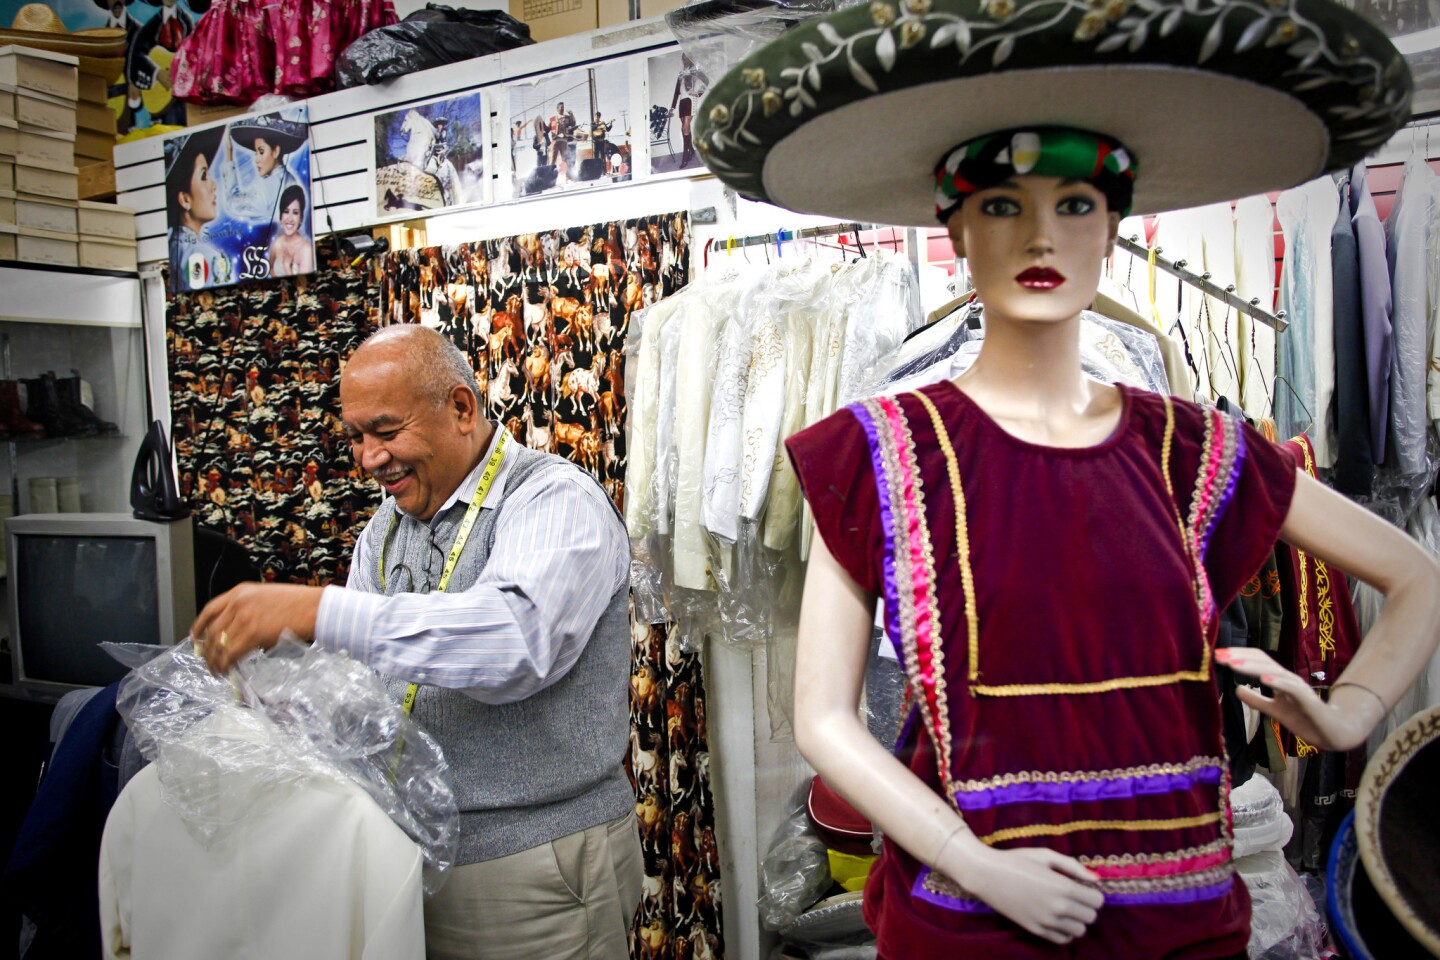 Jorge Tello carefully wraps a finished mariachi suit at his store in Boyle Heights. Tello has been a tailor for the mariachi of Los Angeles and beyond since 1984.